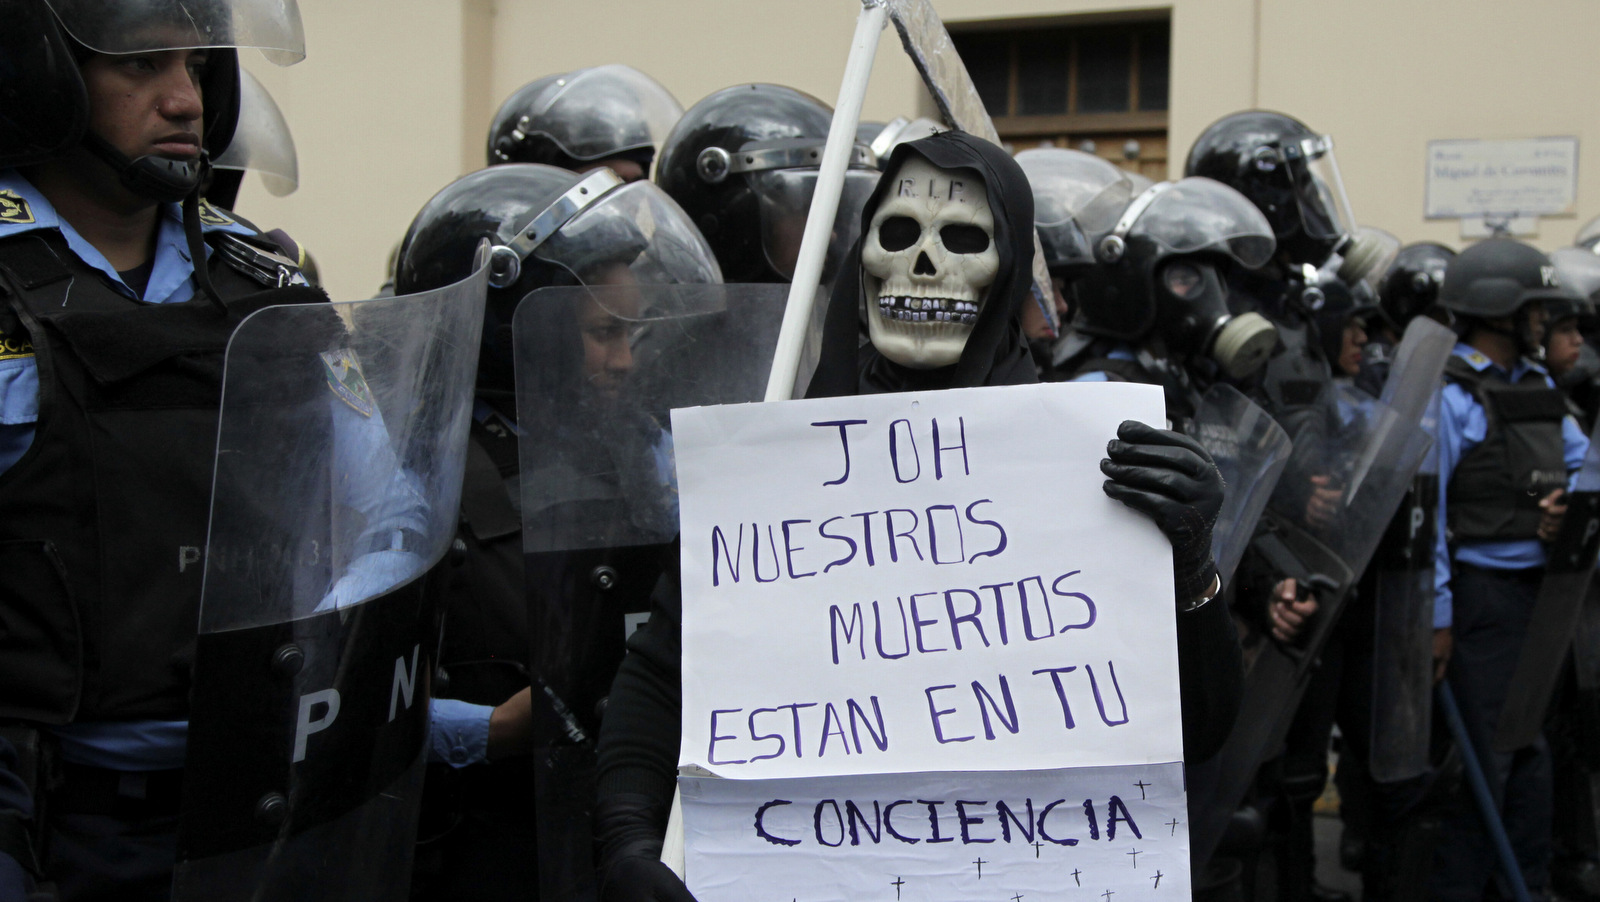 A protester wearing a grim reaper costume holds a sign with a message that reads in Spanish: "JOH our dead are on your conscience," during a protest by demonstrators against Honduras' President Juan Orlando Hernandez, in Tegucigalpa, Honduras, Jan. 25, 2018. Hernandez was awarded the electoral win last month despite the disputed vote tally. The opposition plans to continue protesting through his swearing-in Jan. 27. (AP/Fernando Antonio)